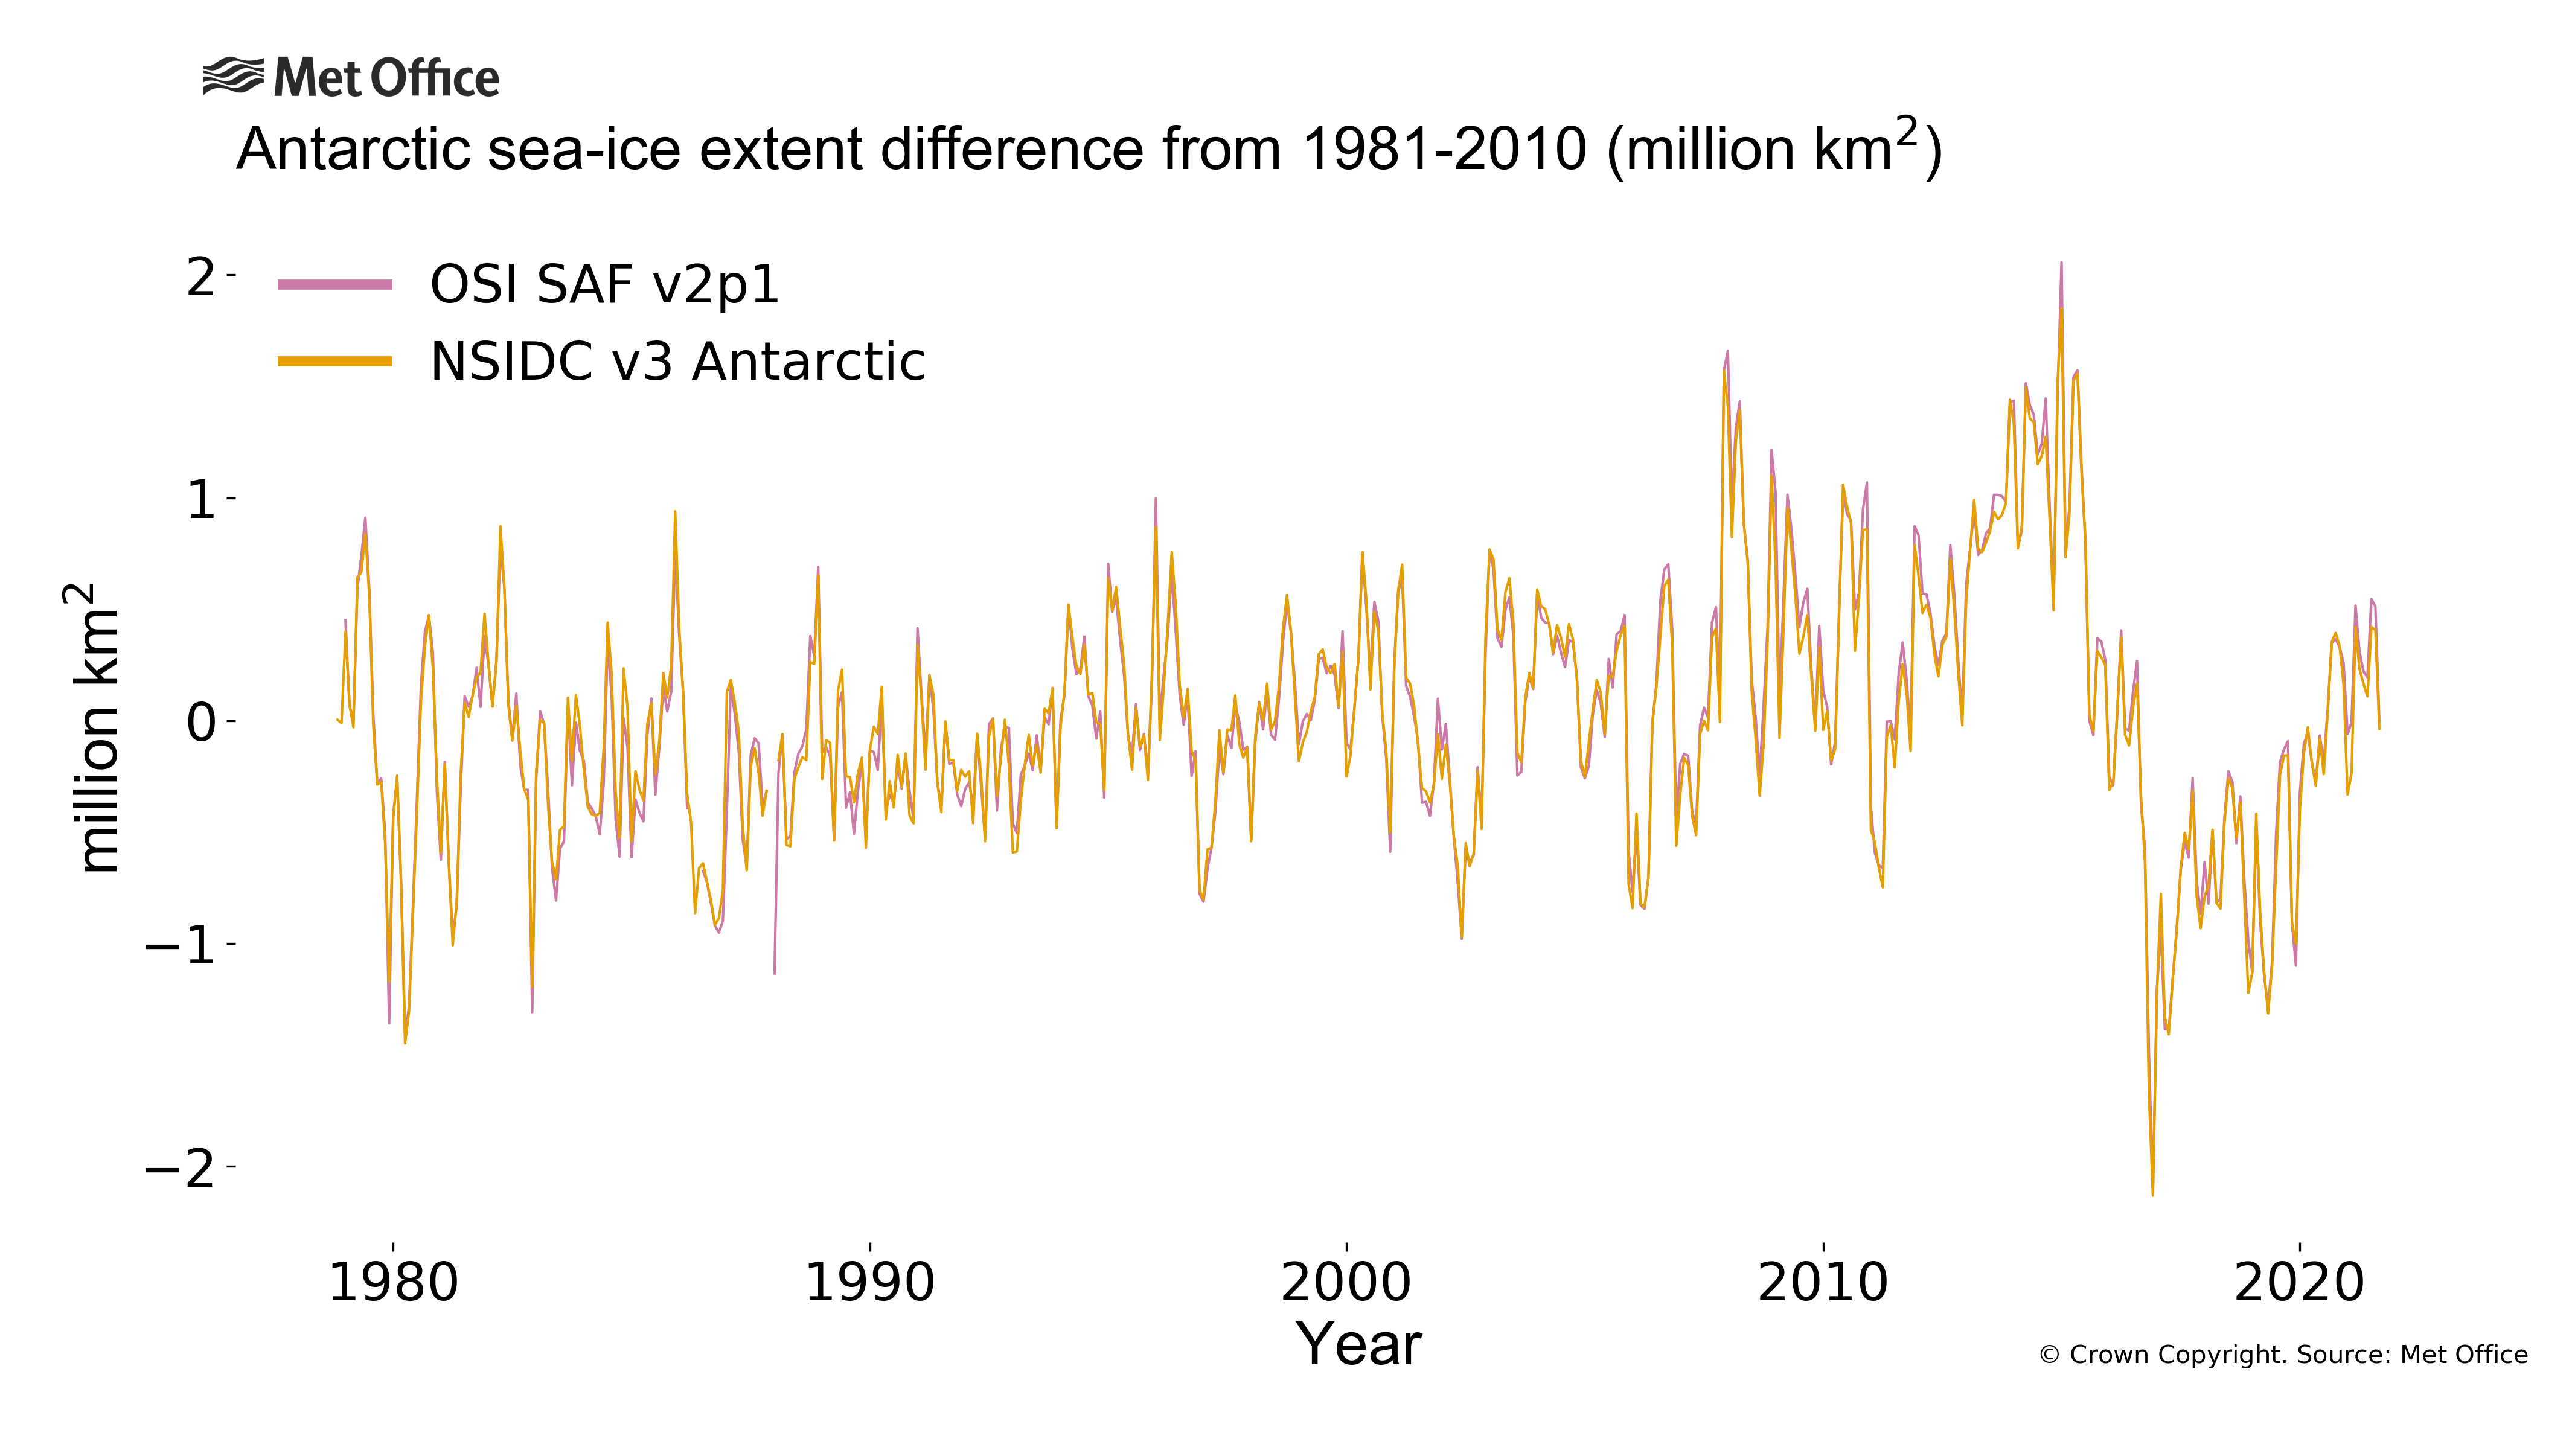 
Monthly antarctic sea ice extent difference from the 1981-2010 average.
